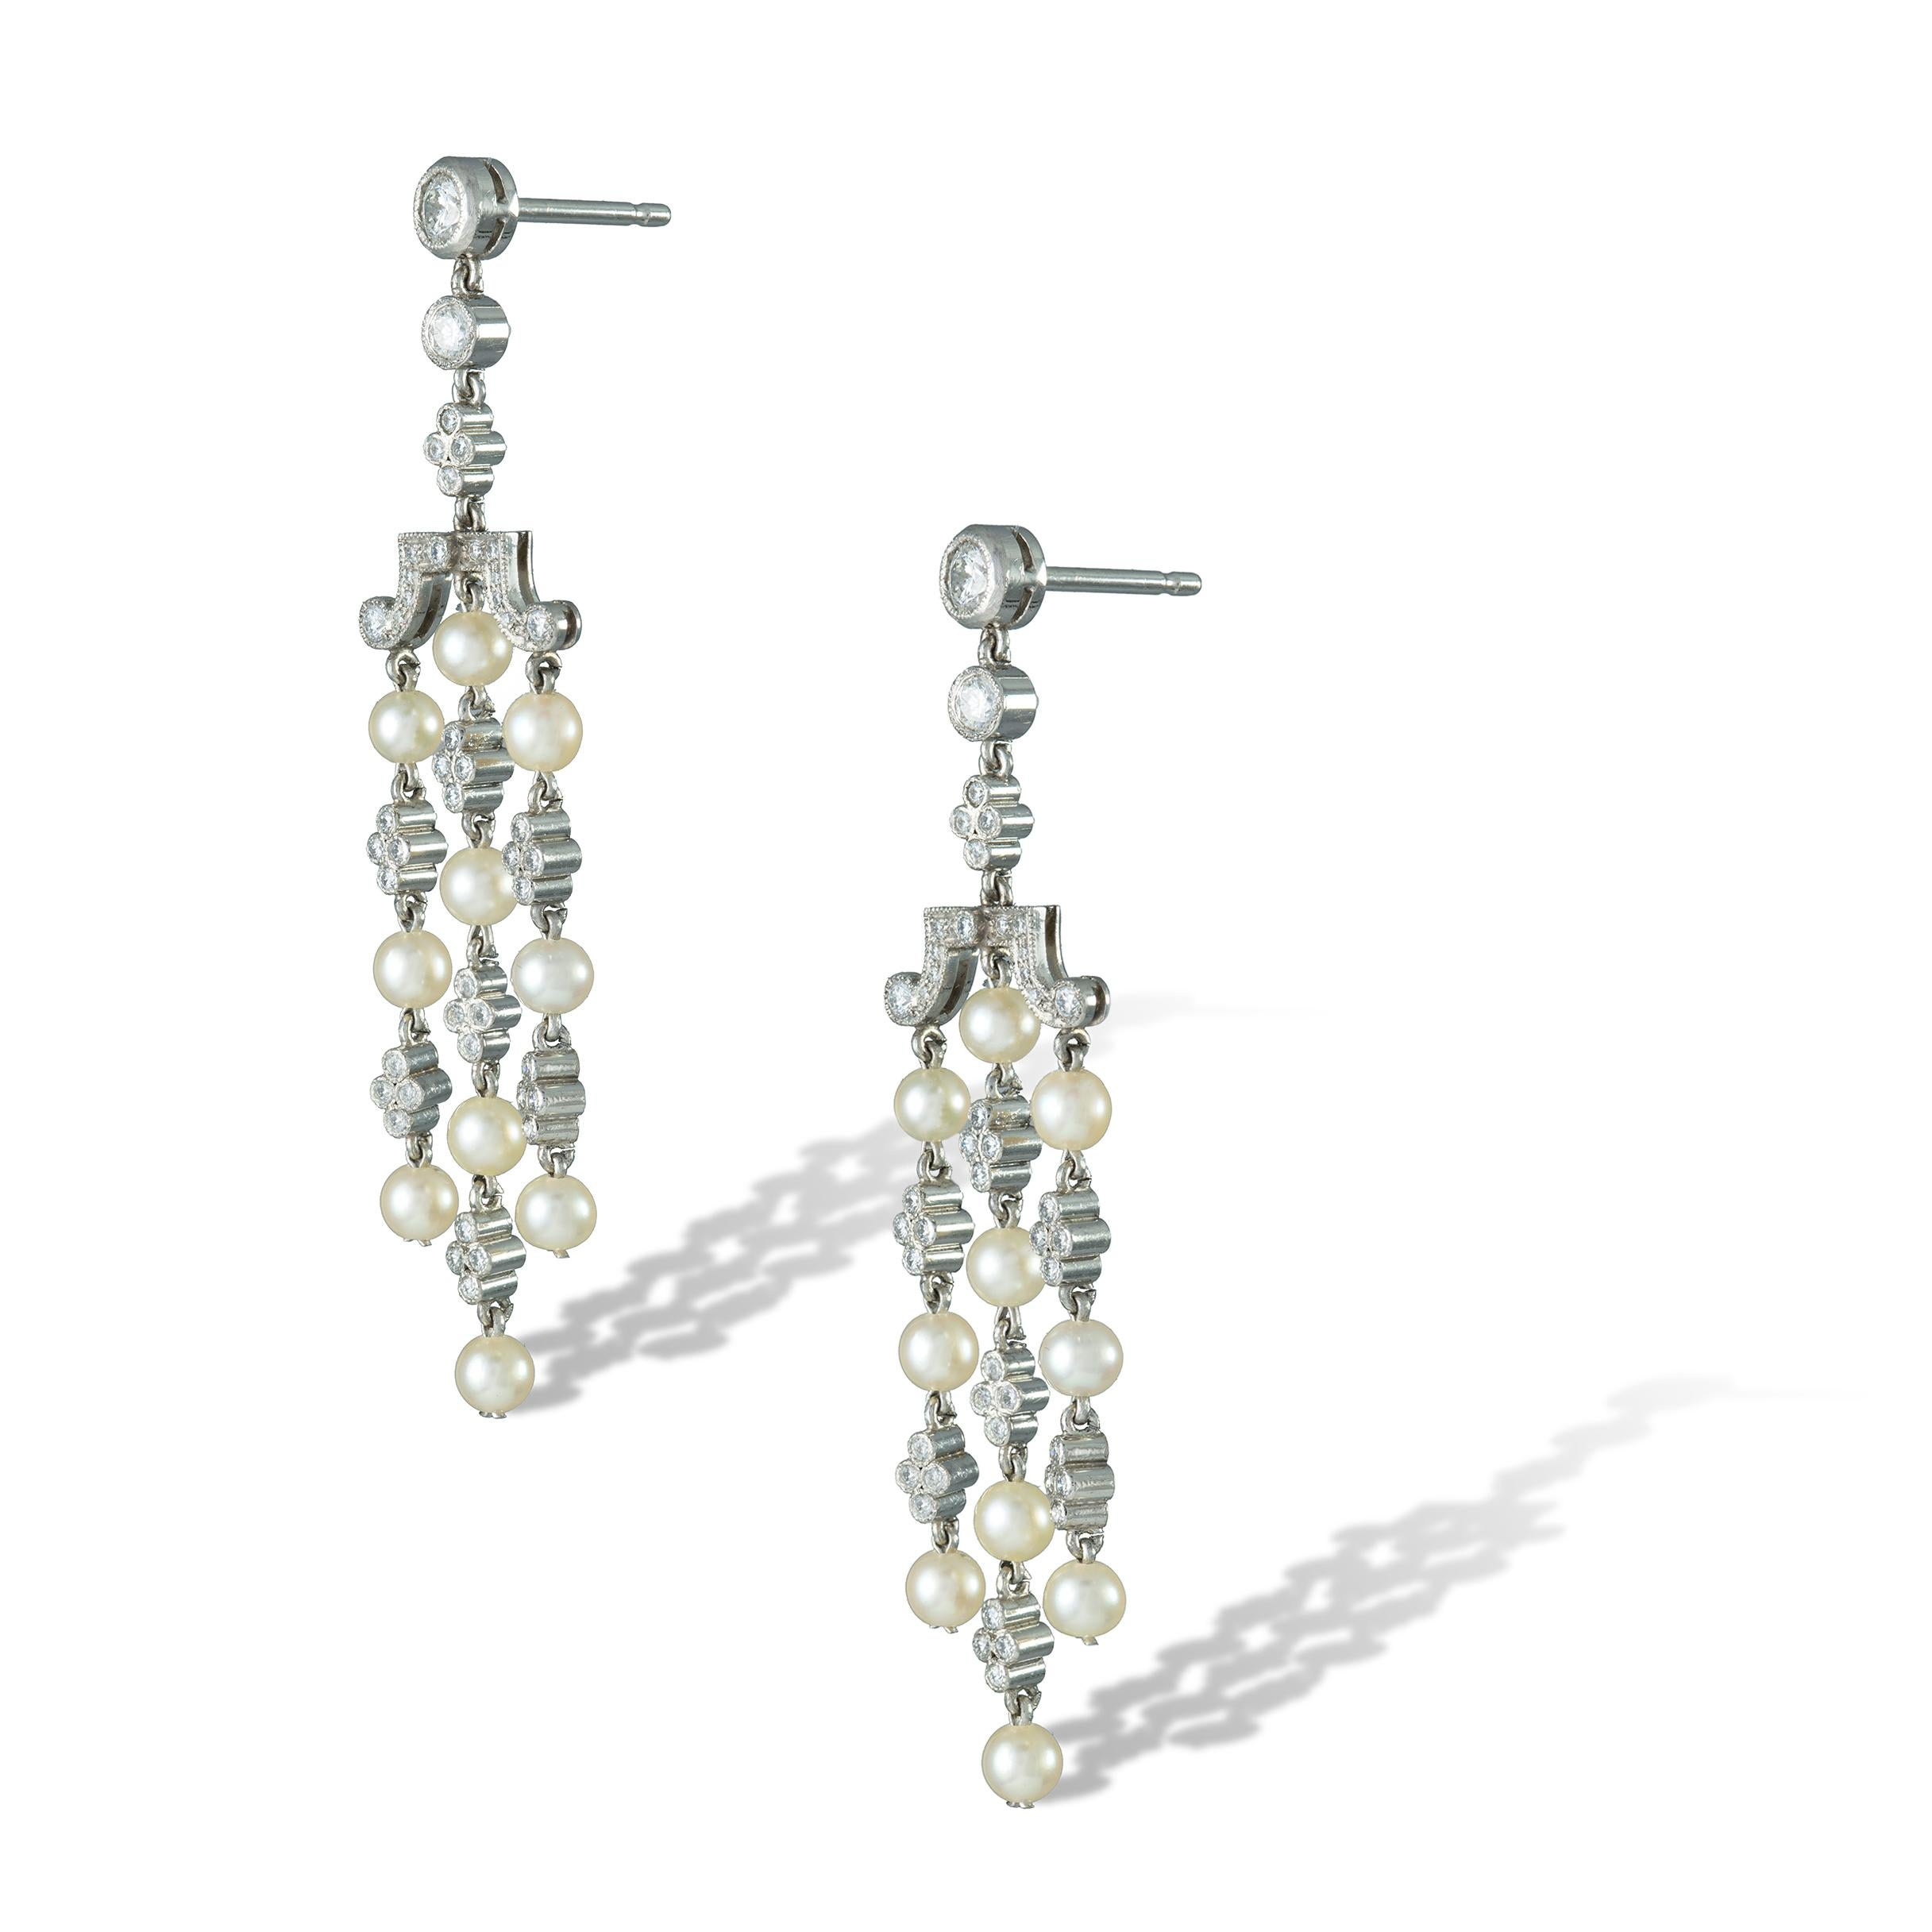 A pair of natural pearl and diamond tassel drop earrings, made by Bentley & Skinner, each earring consisting of three drops embellished with ten natural pearls with a quatrefoil diamond cluster between each pearl, accompanied by GCS report stating